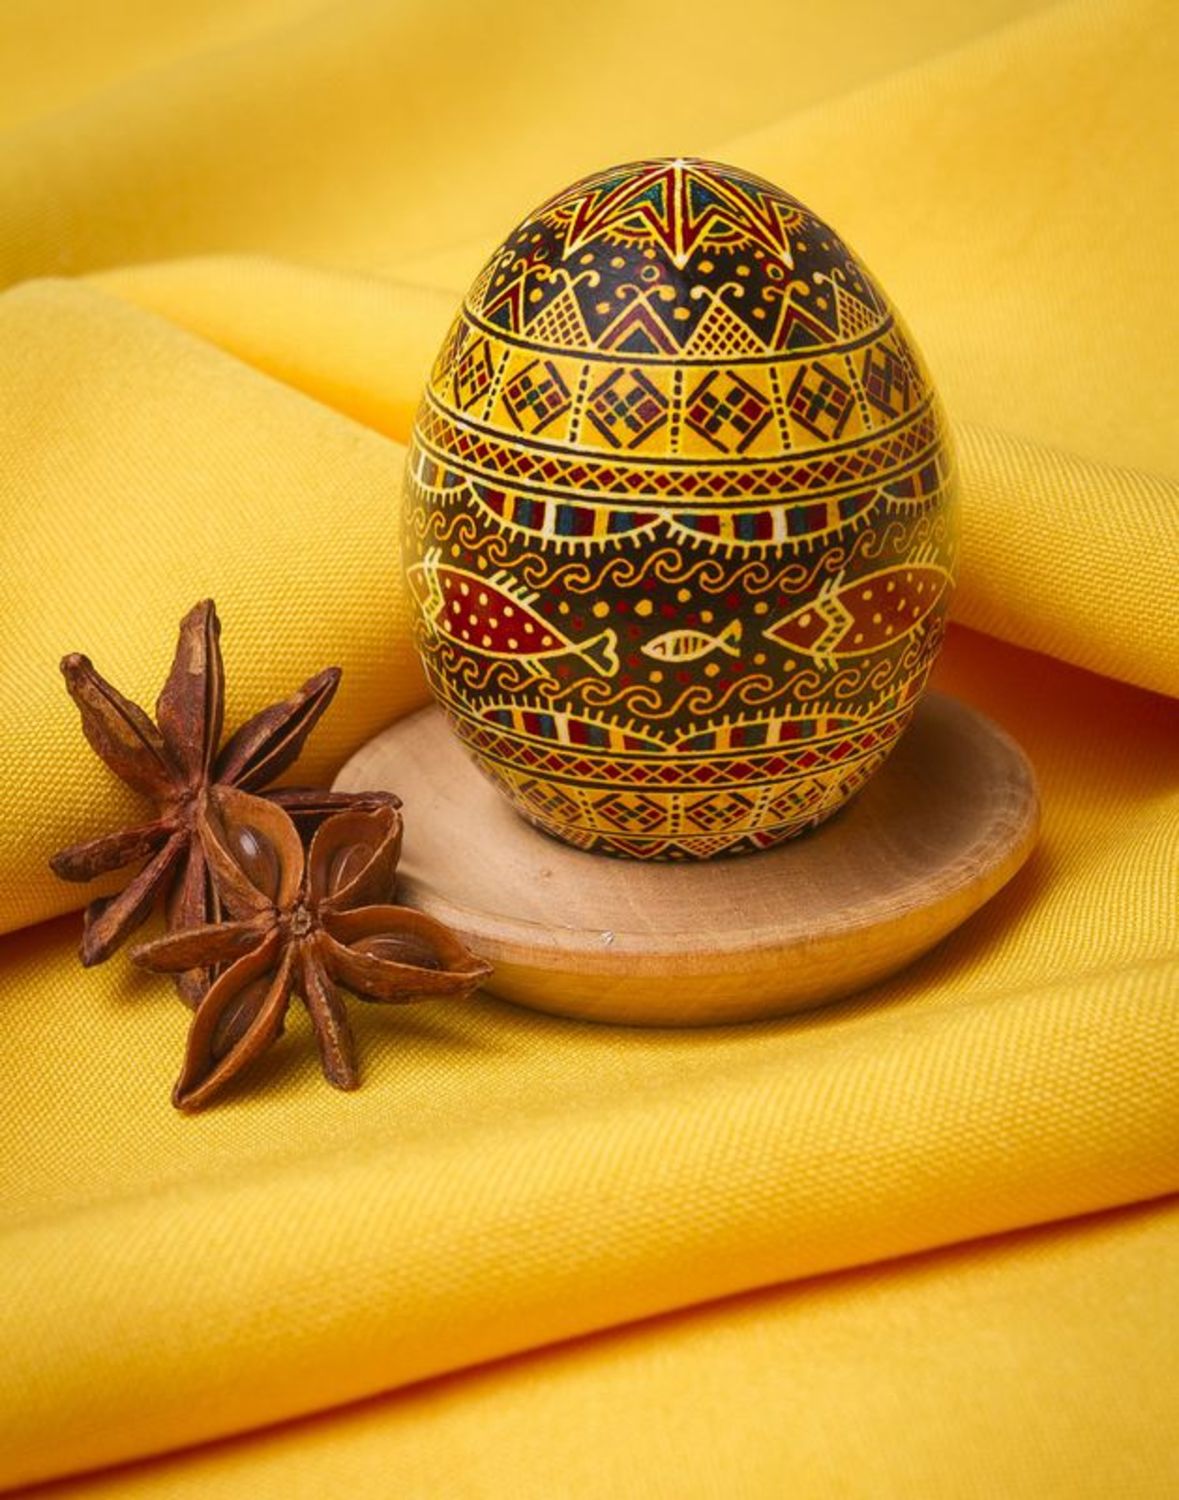 Easter egg painted by hand photo 1